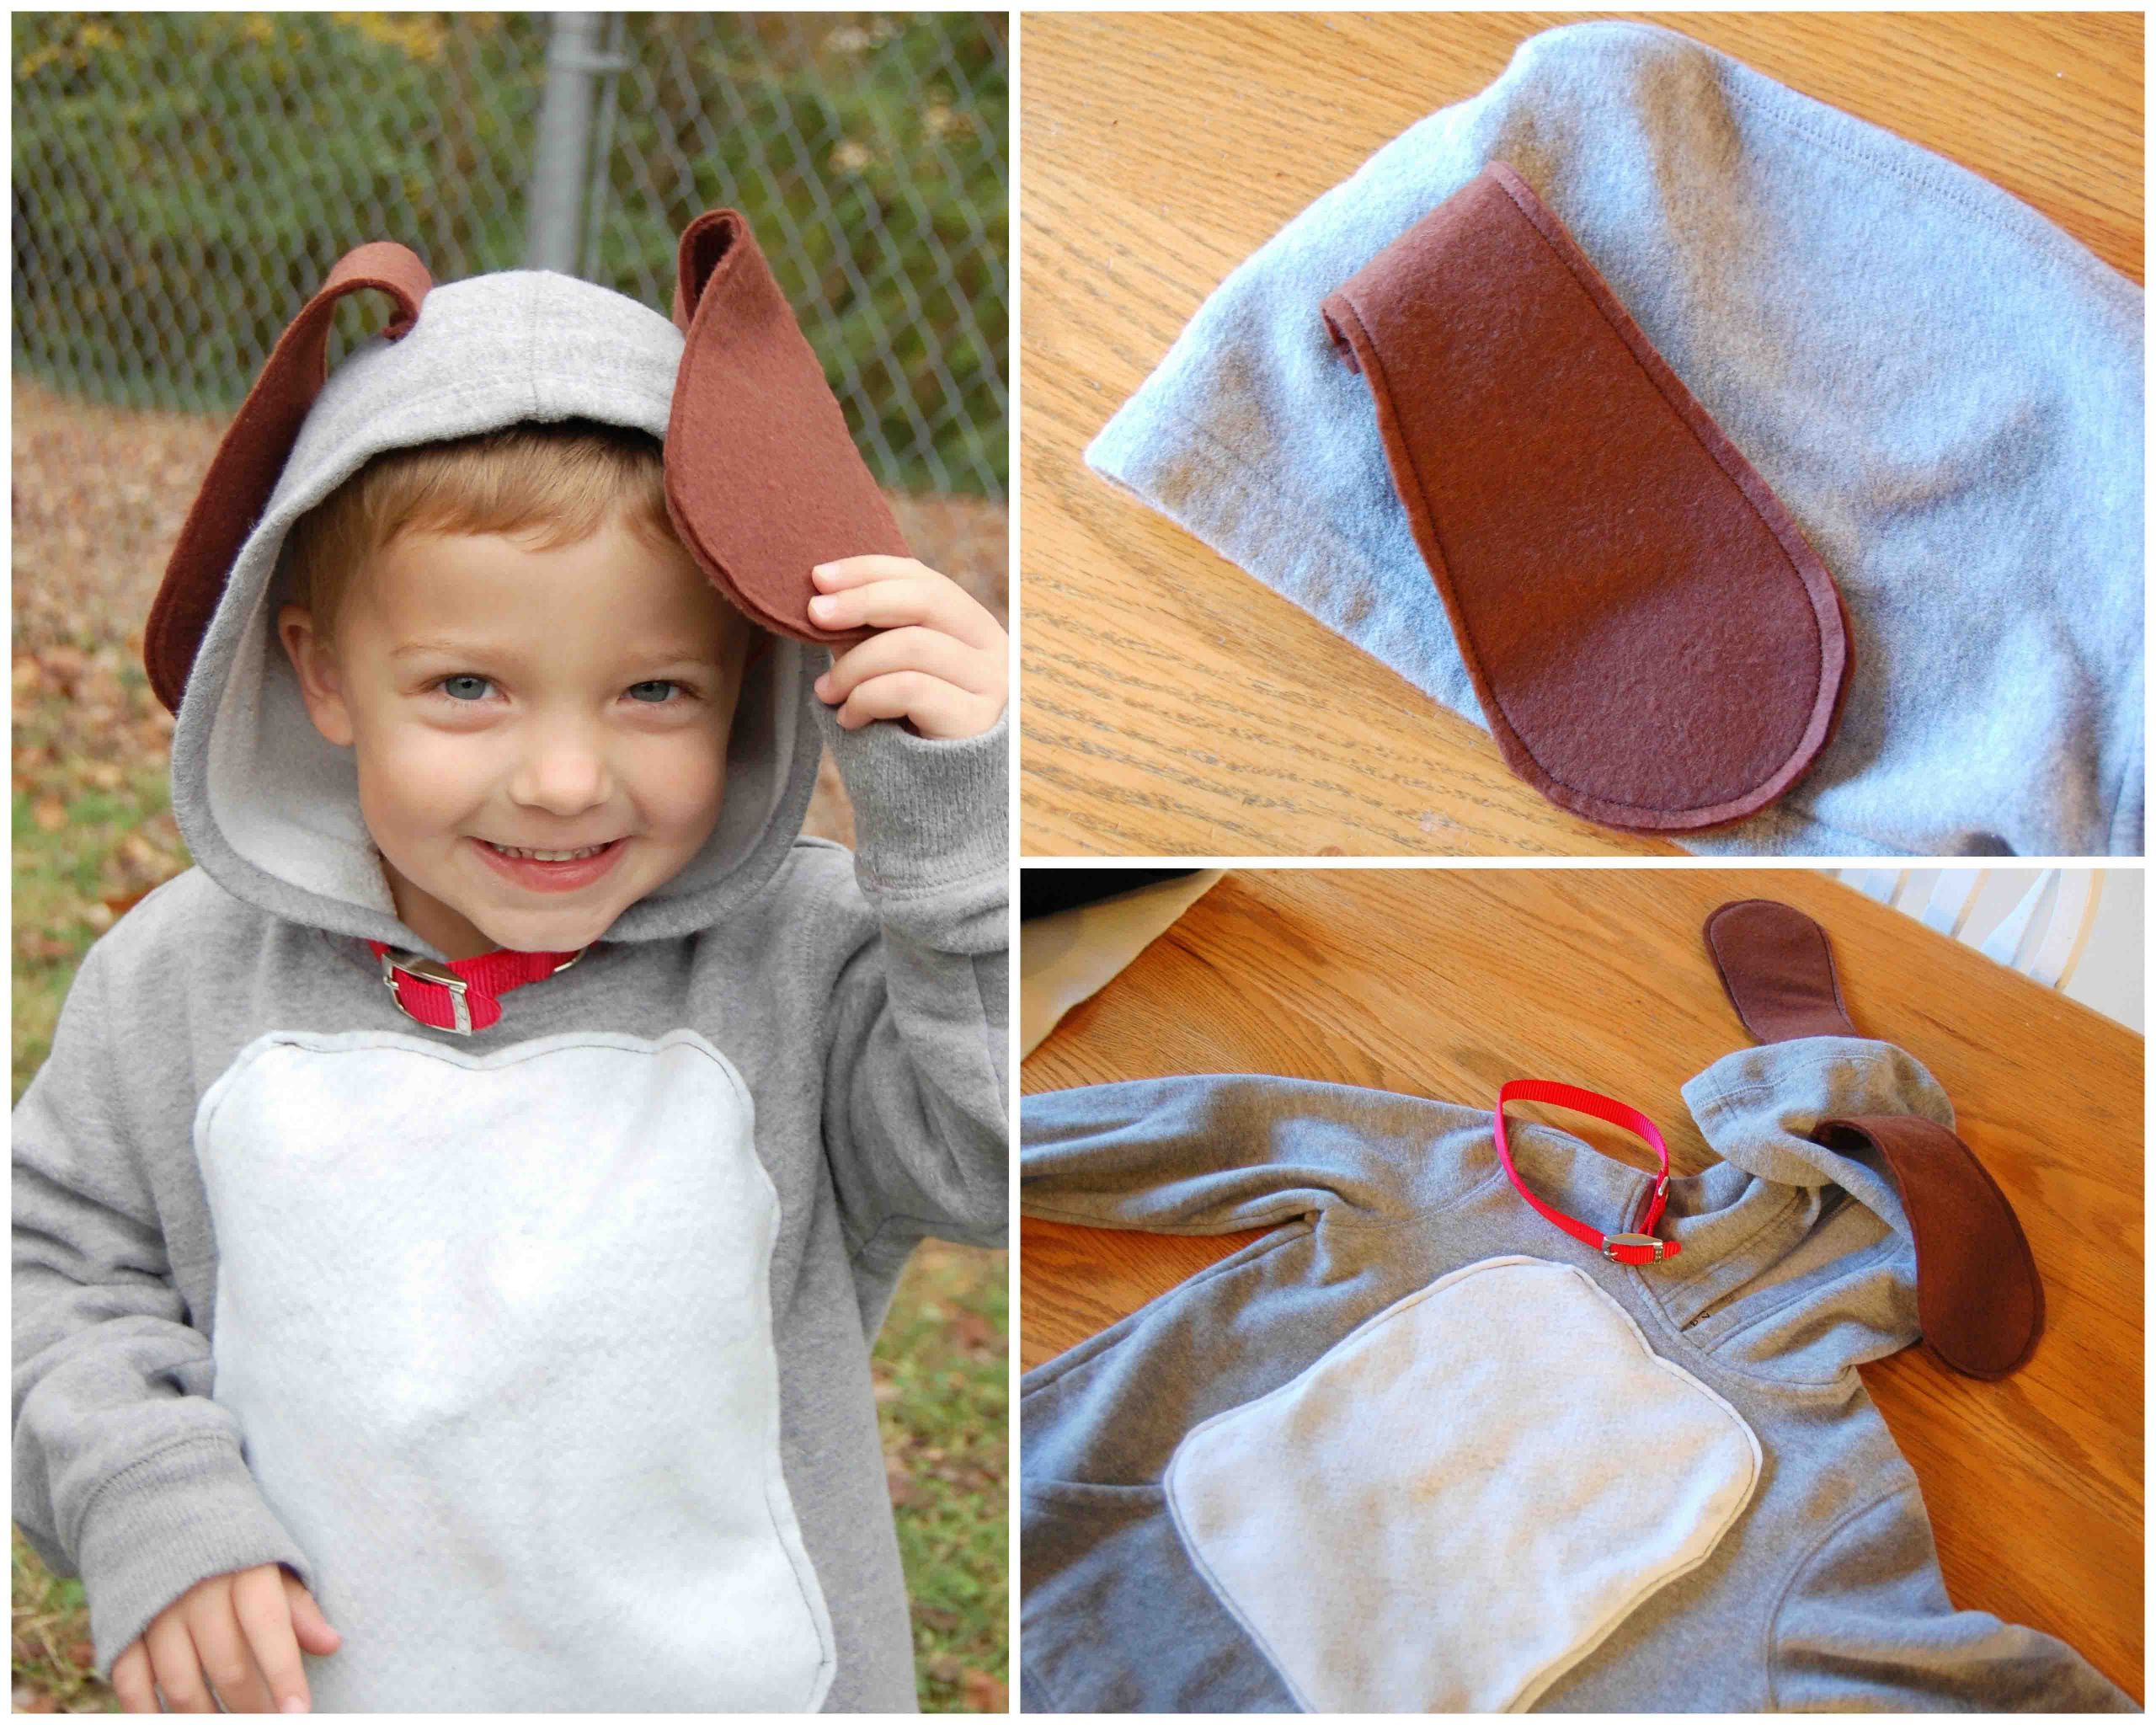 DIY Dog Costume For Child
 [Pinning my own because I had trouble finding a homemade